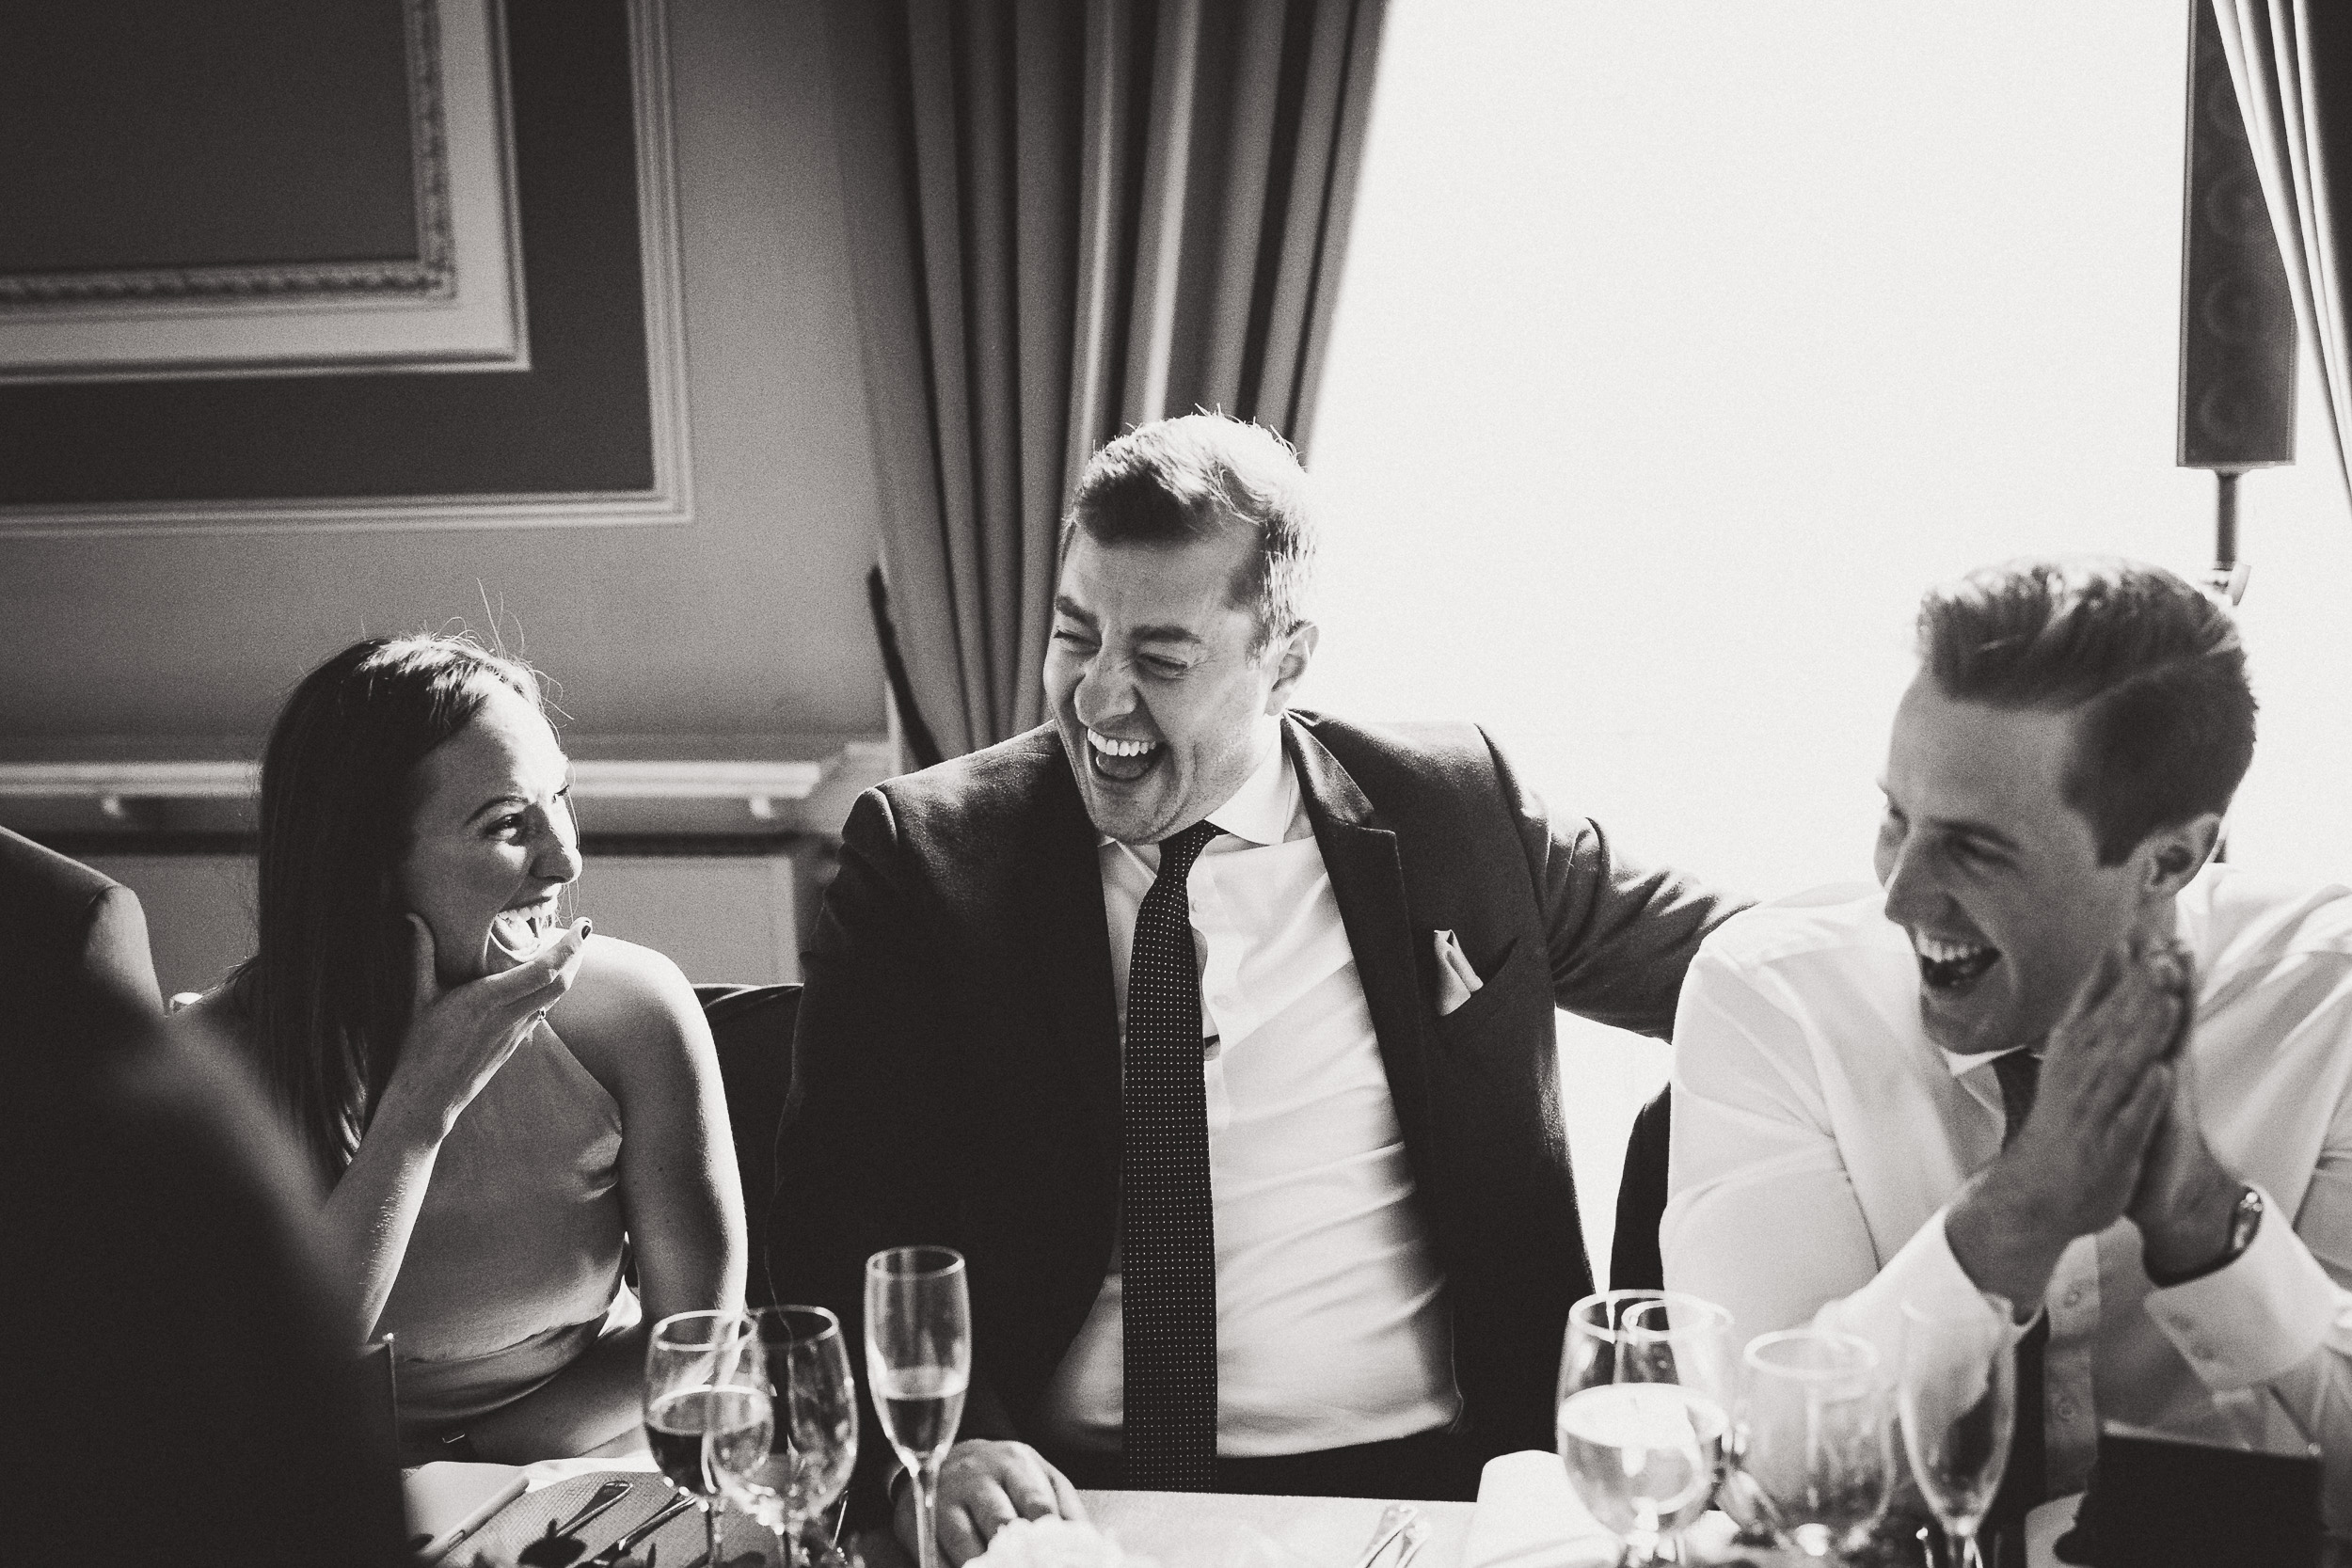 A wedding photographer captured a black and white groom's photo featuring a group of people laughing at a table.